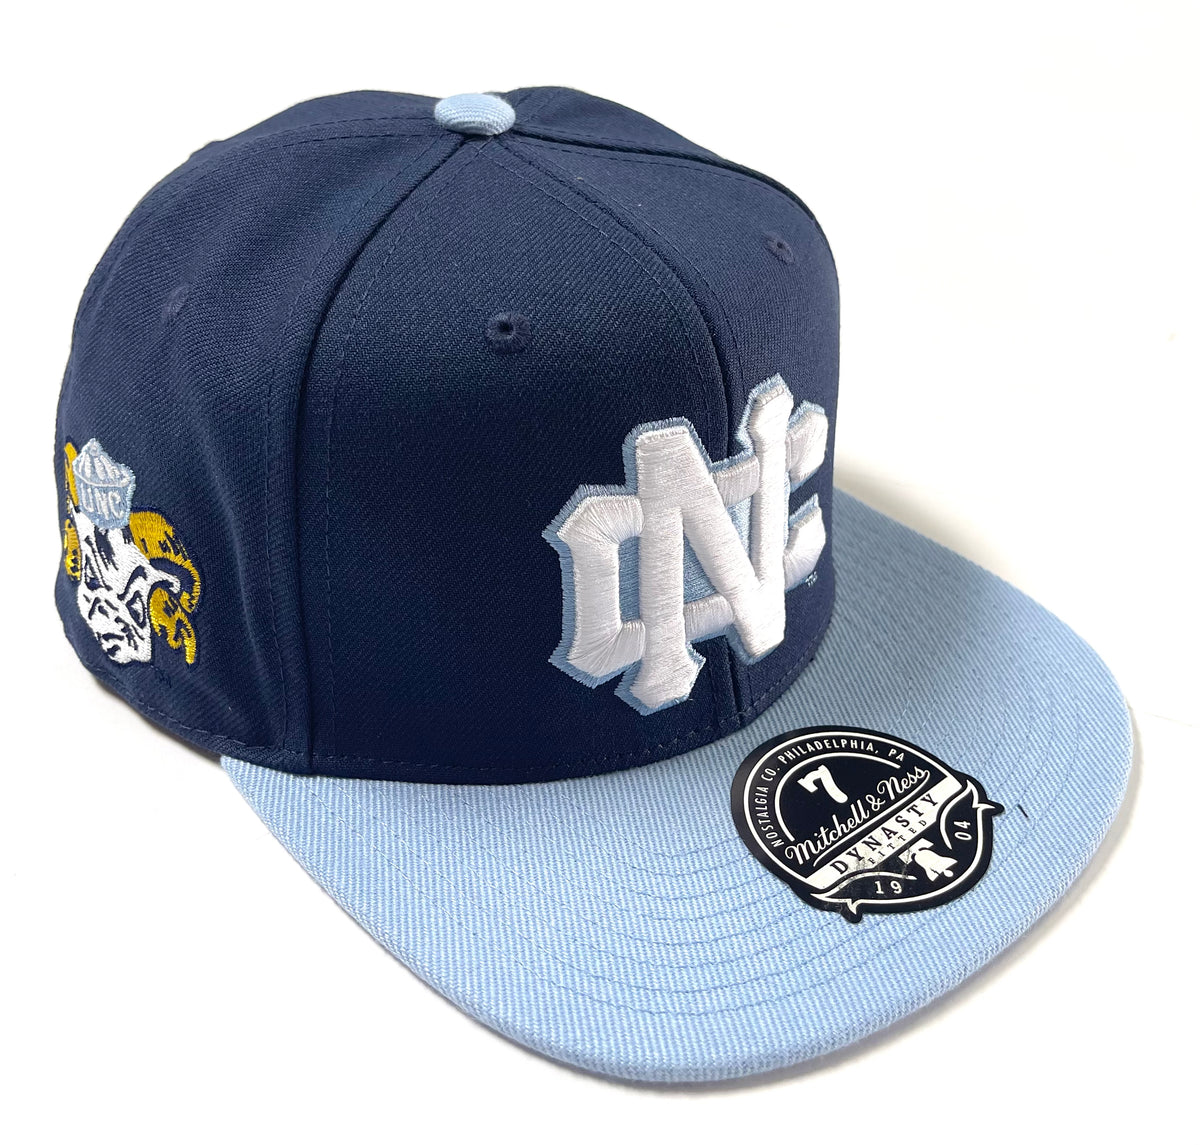 UNC Navy Blue CHILL Hat in Athletic Material Flat Bill with Cord